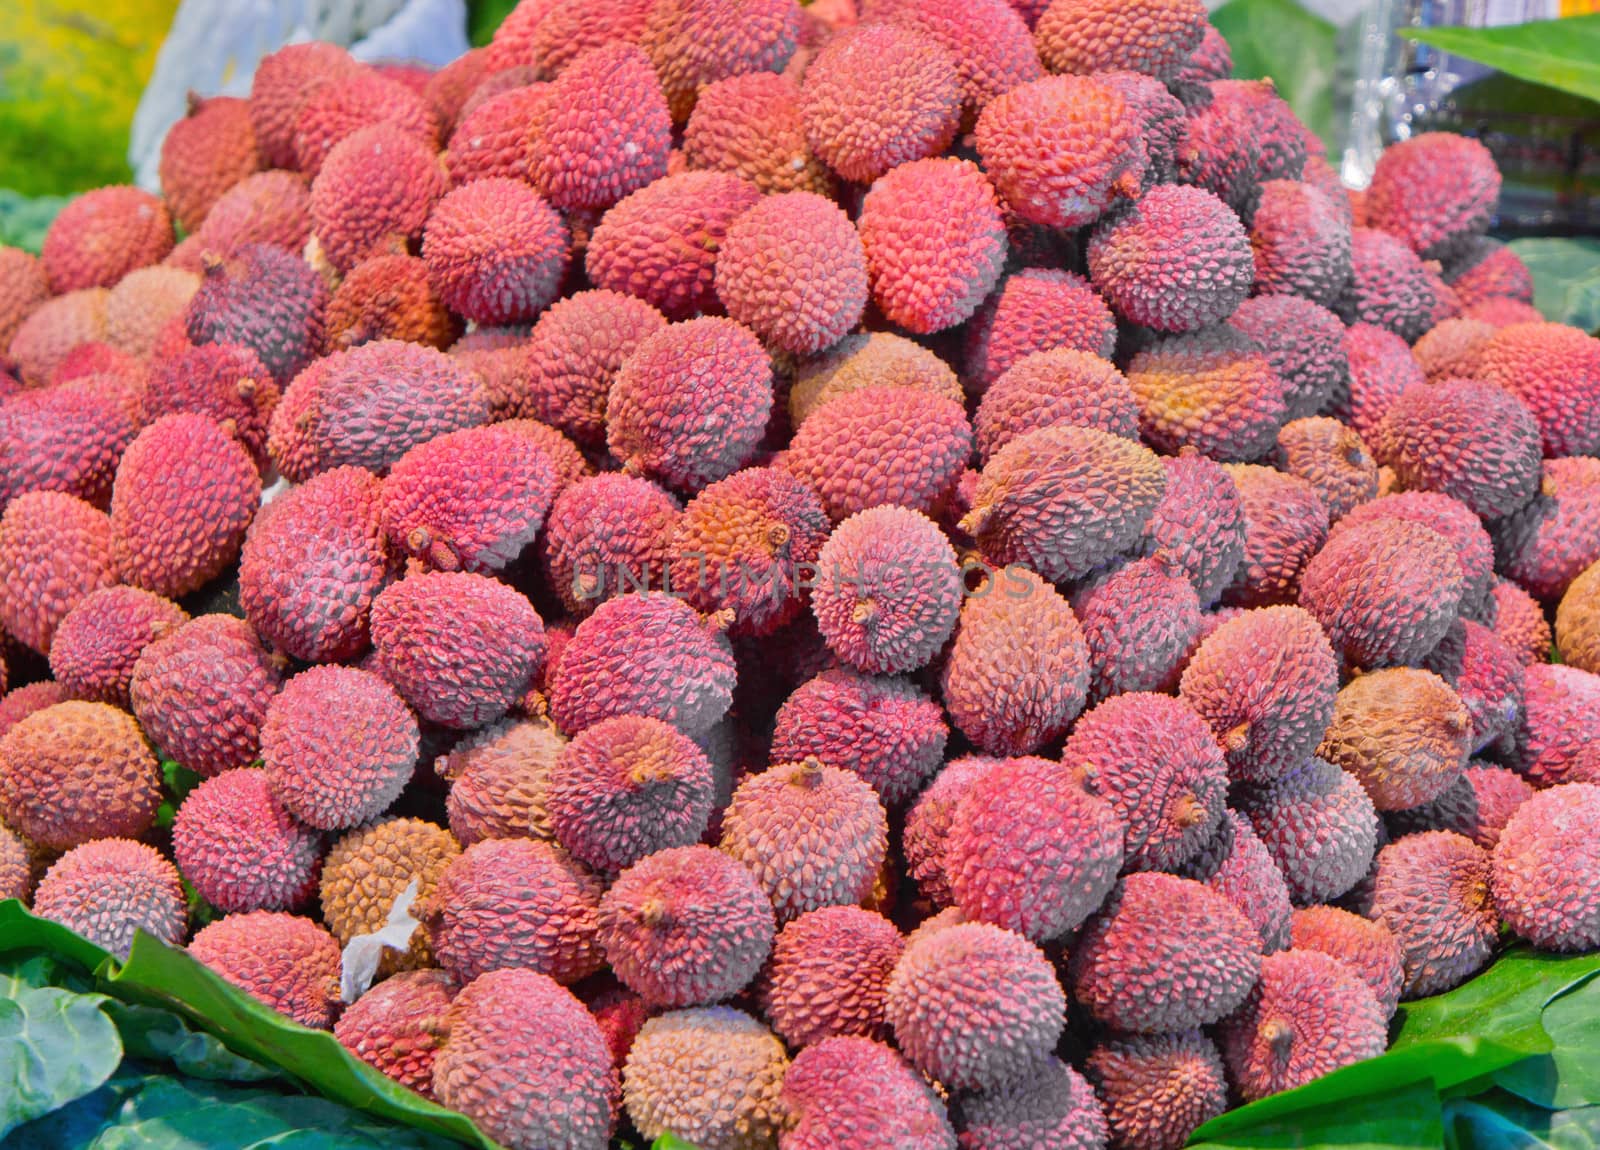 A bunch of fresh lychees on a market stall